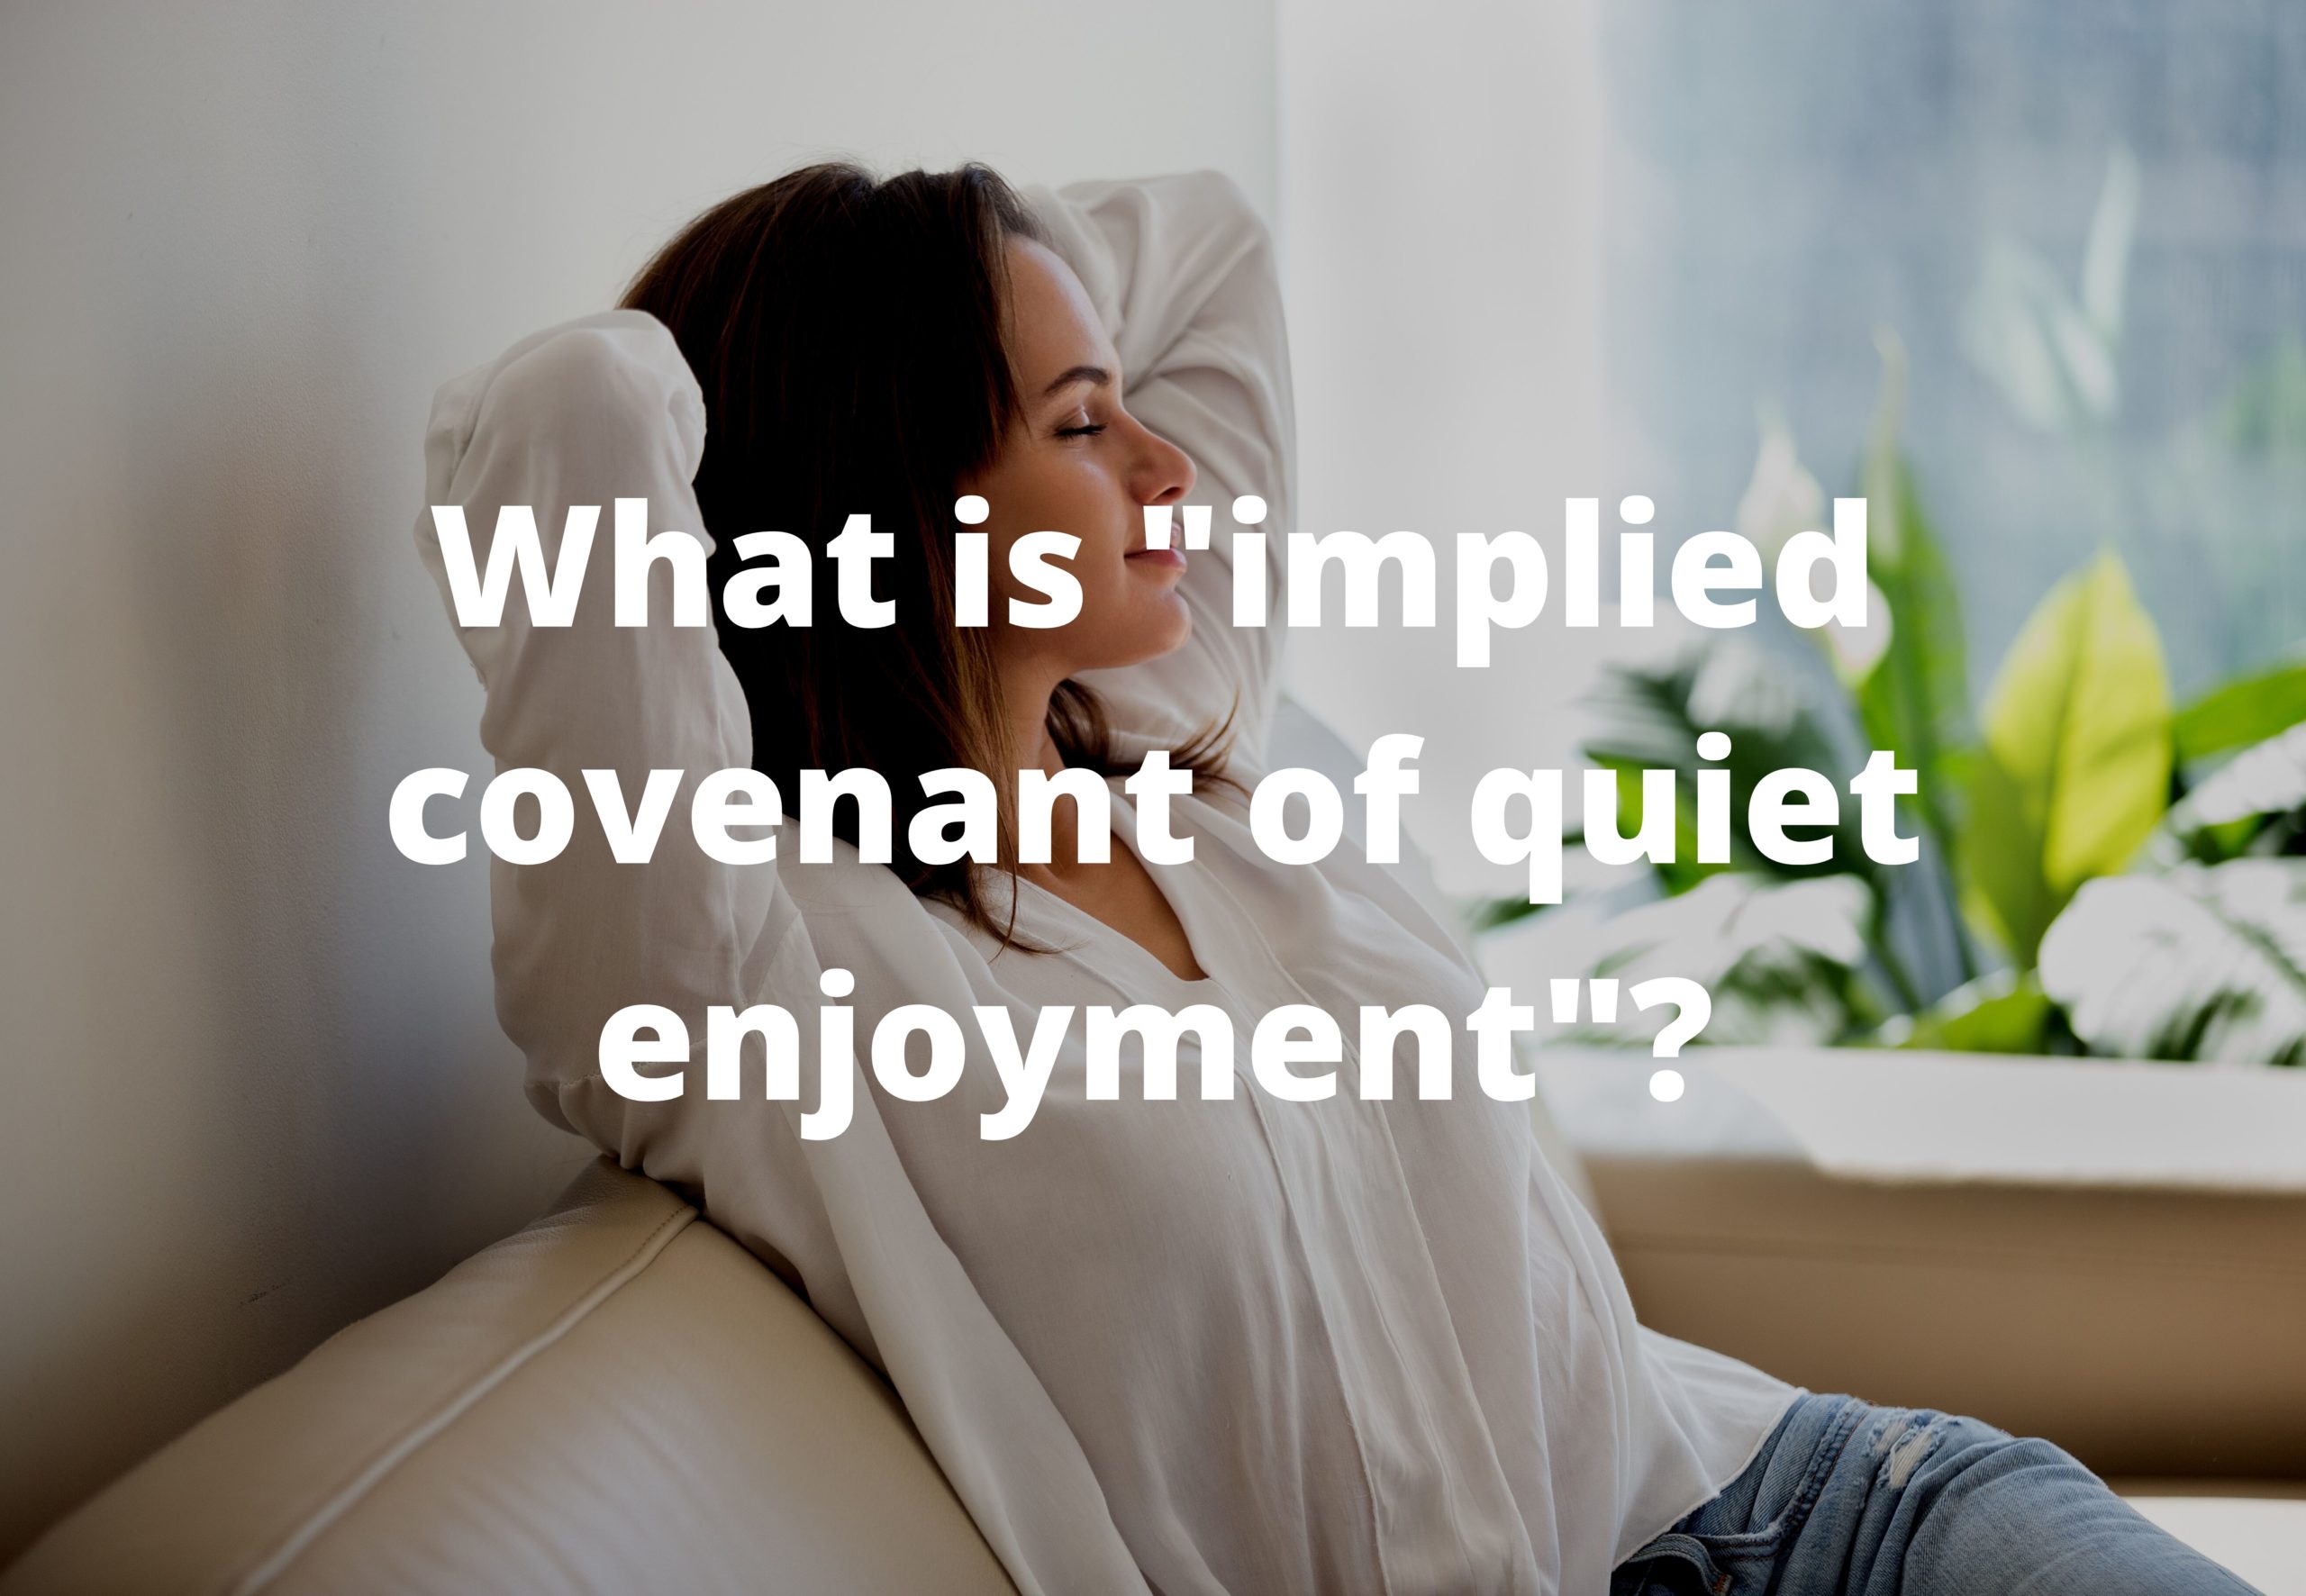 What is “implied covenant of quiet enjoyment”?